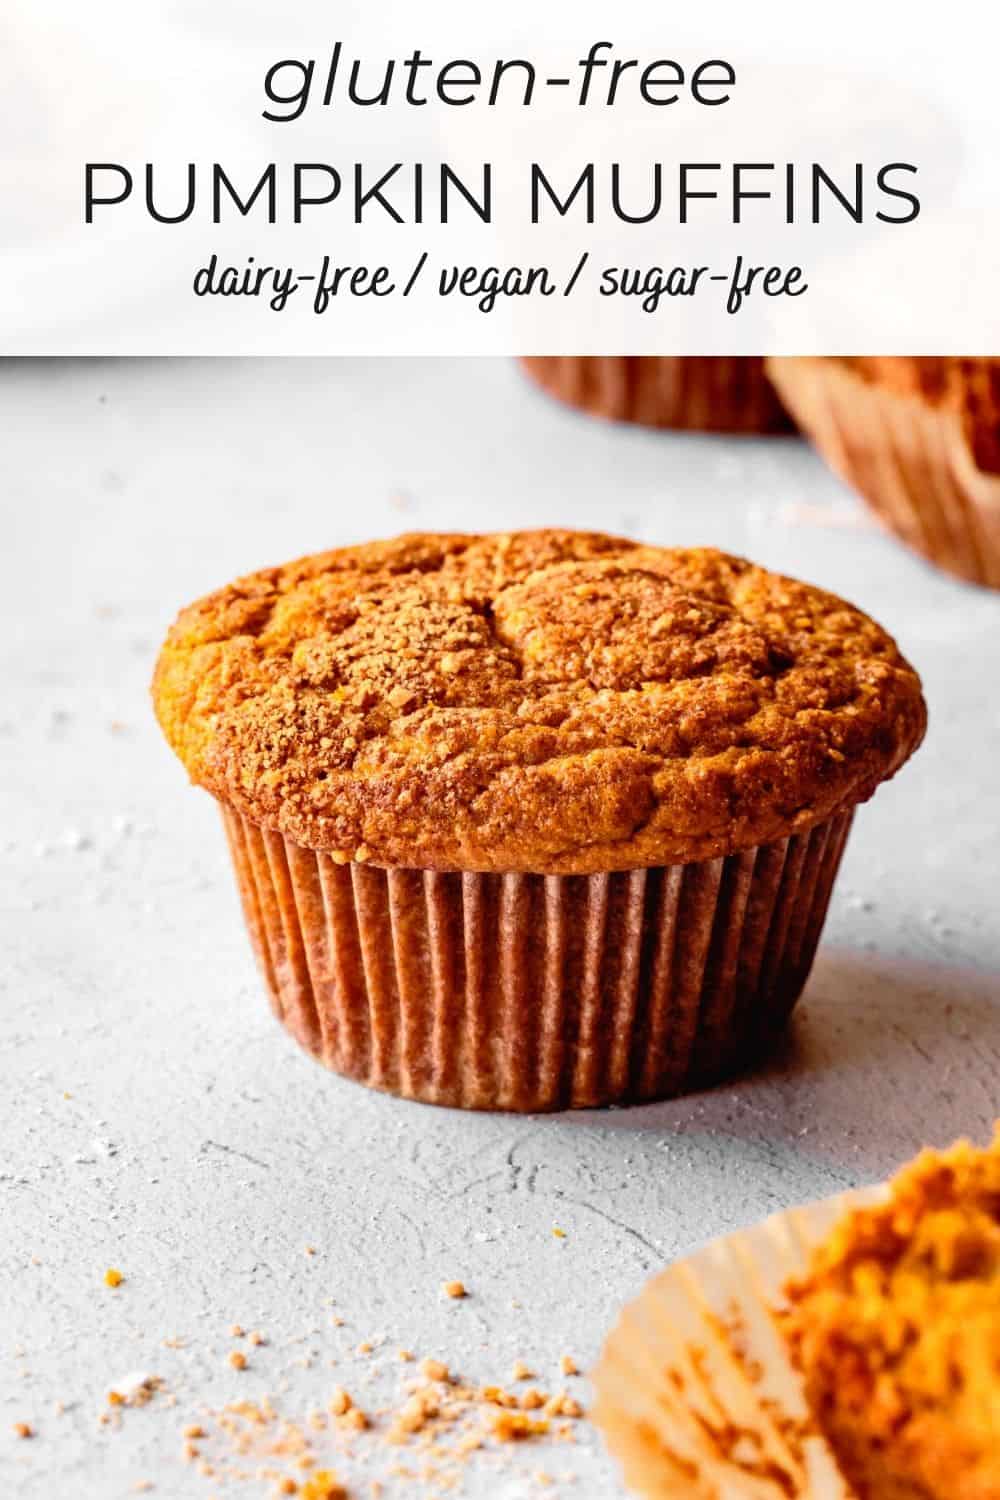 image of pumpkin muffin with text